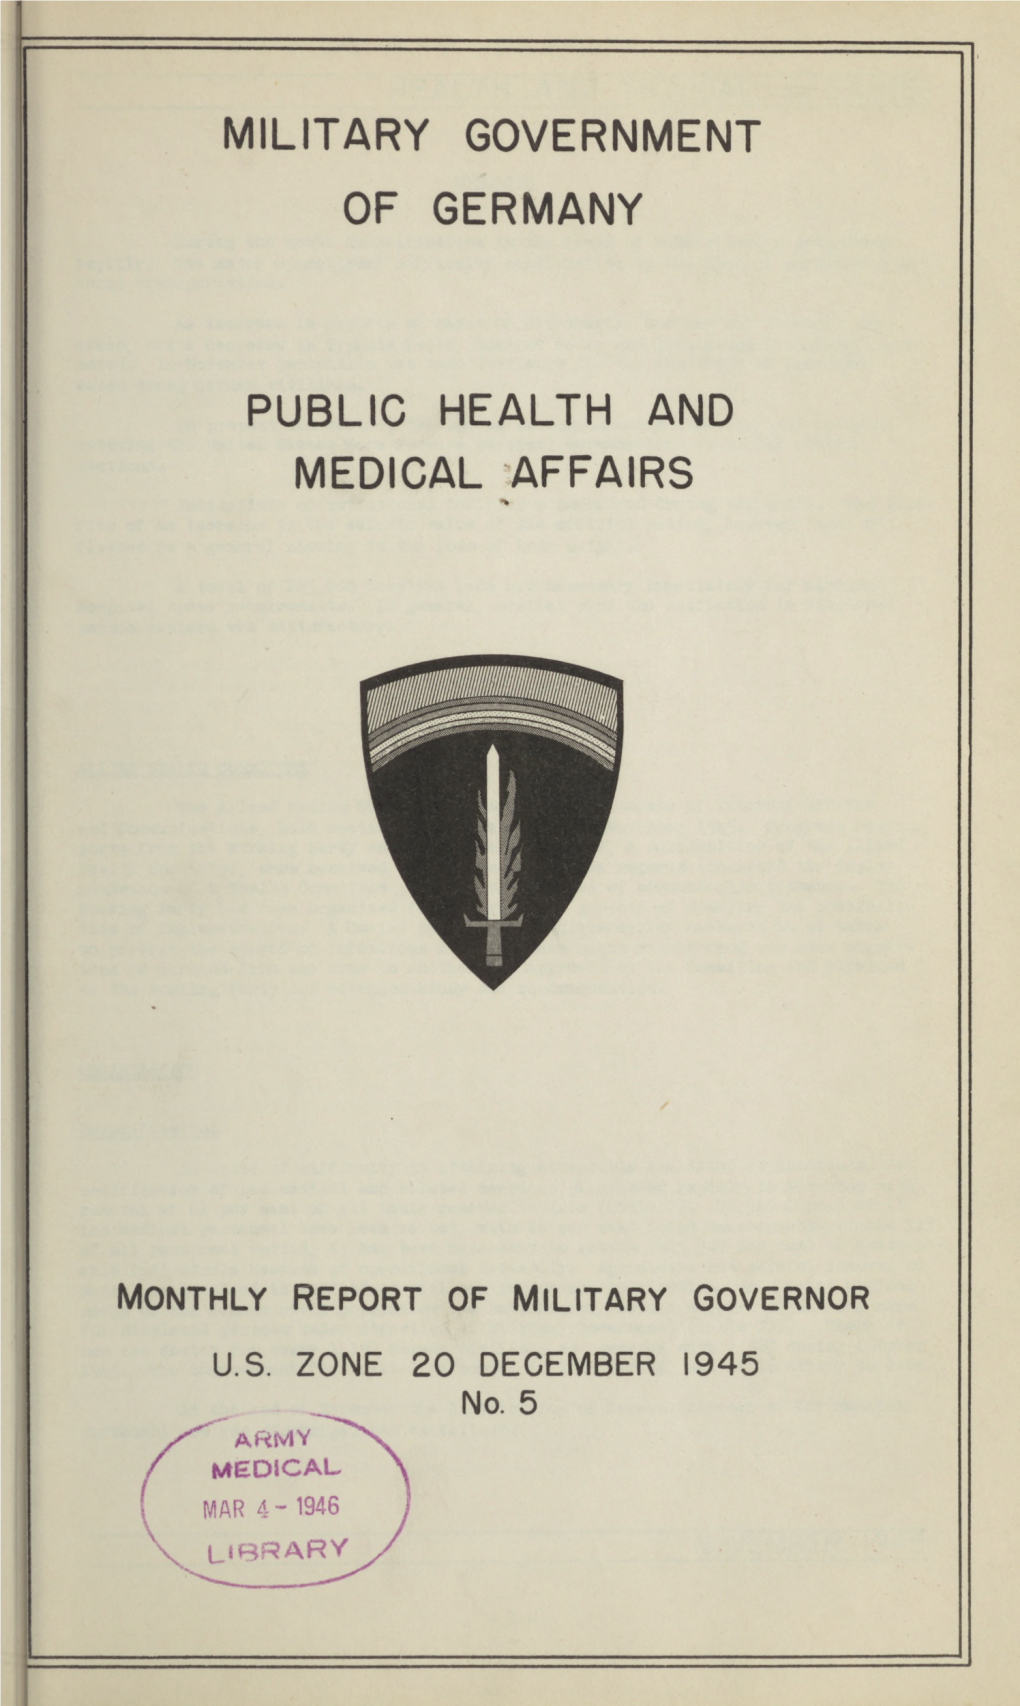 Public Health and Medical Affairs